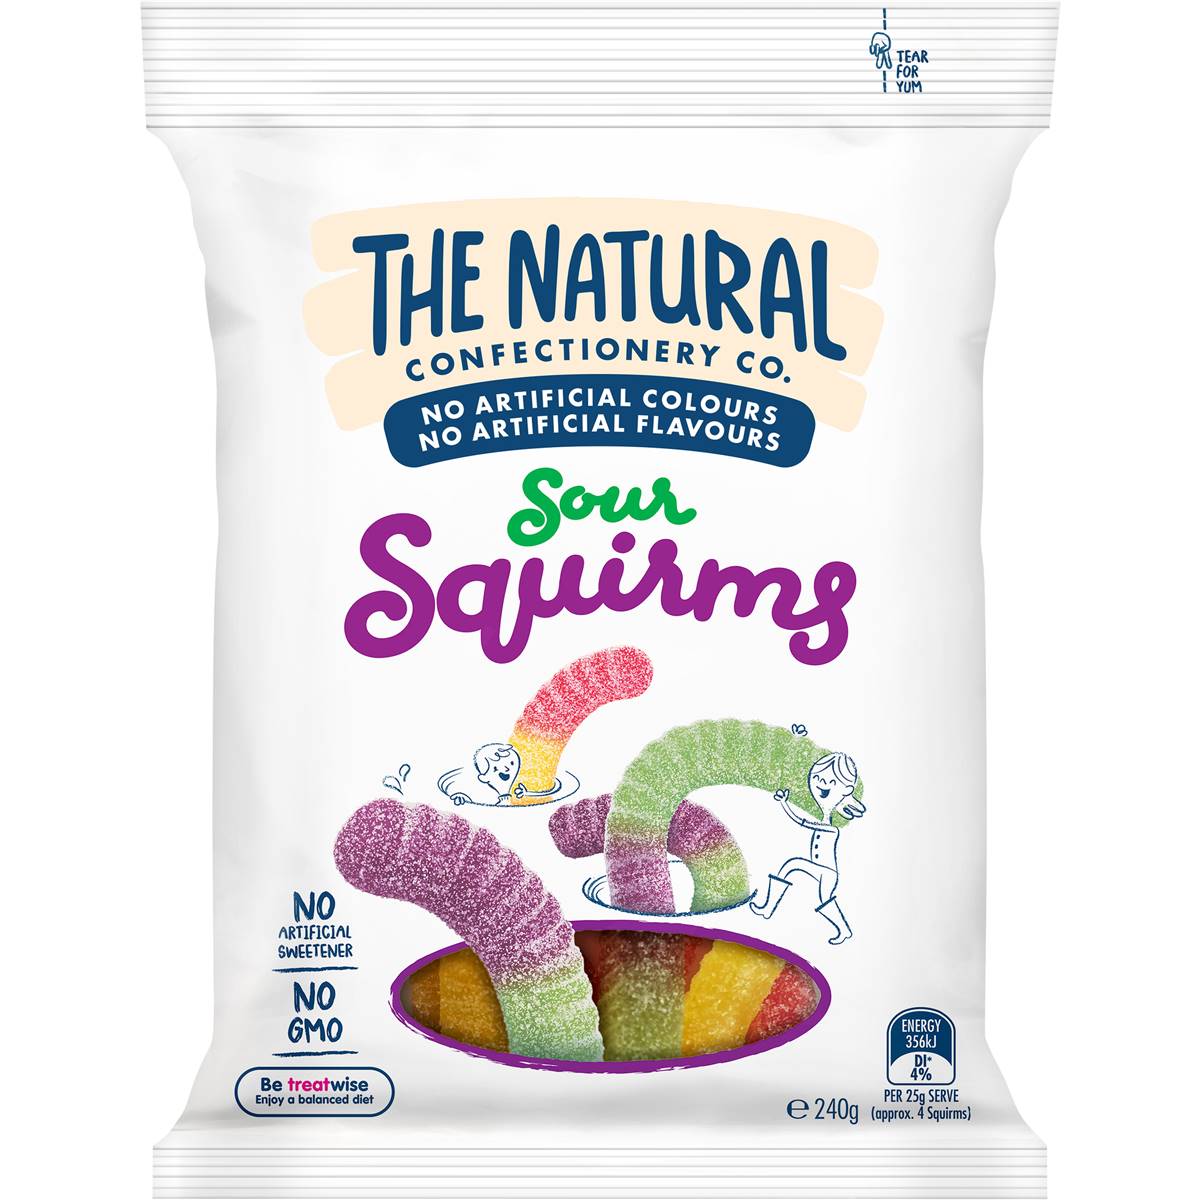 Calories in The Natural Confectionery Co. Sour Squirms Lollies